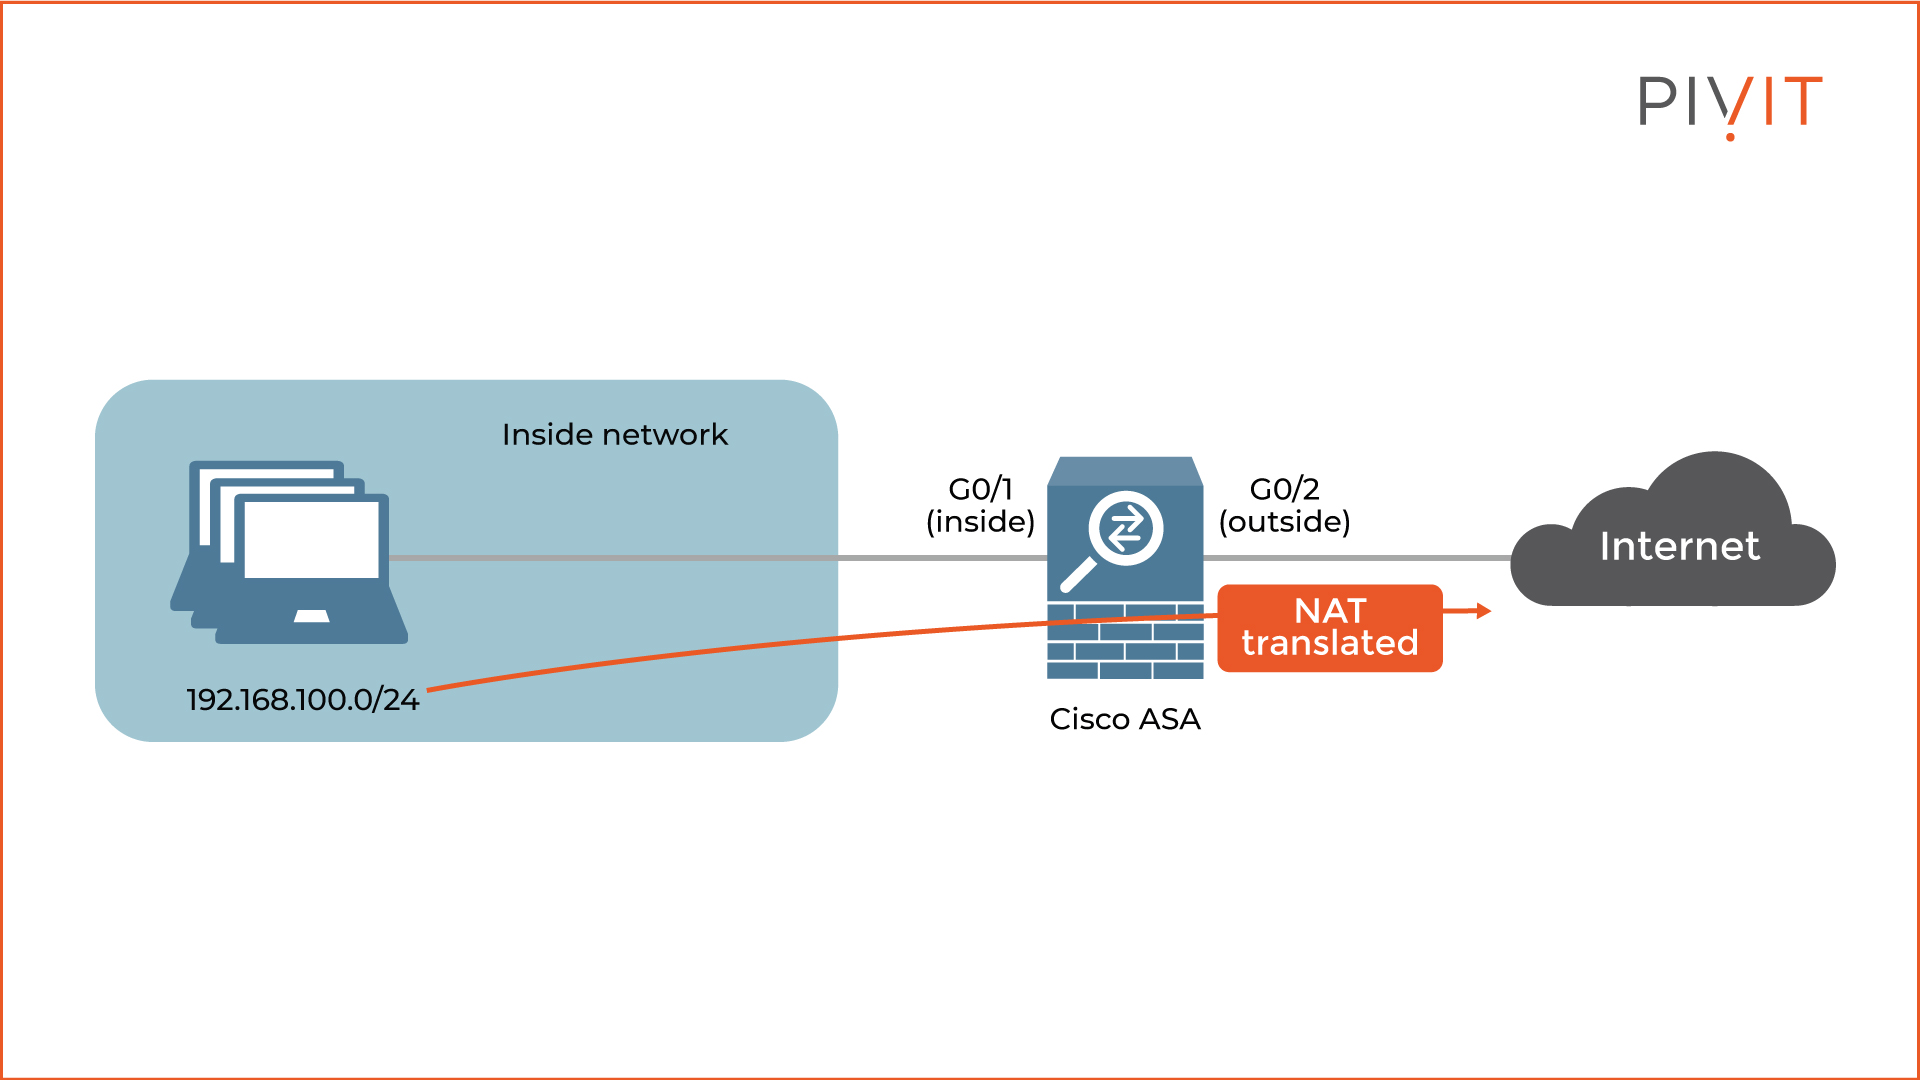 Cisco ASA performs dynamic NAT translation on the hosts from the inside network when communicating on the internet